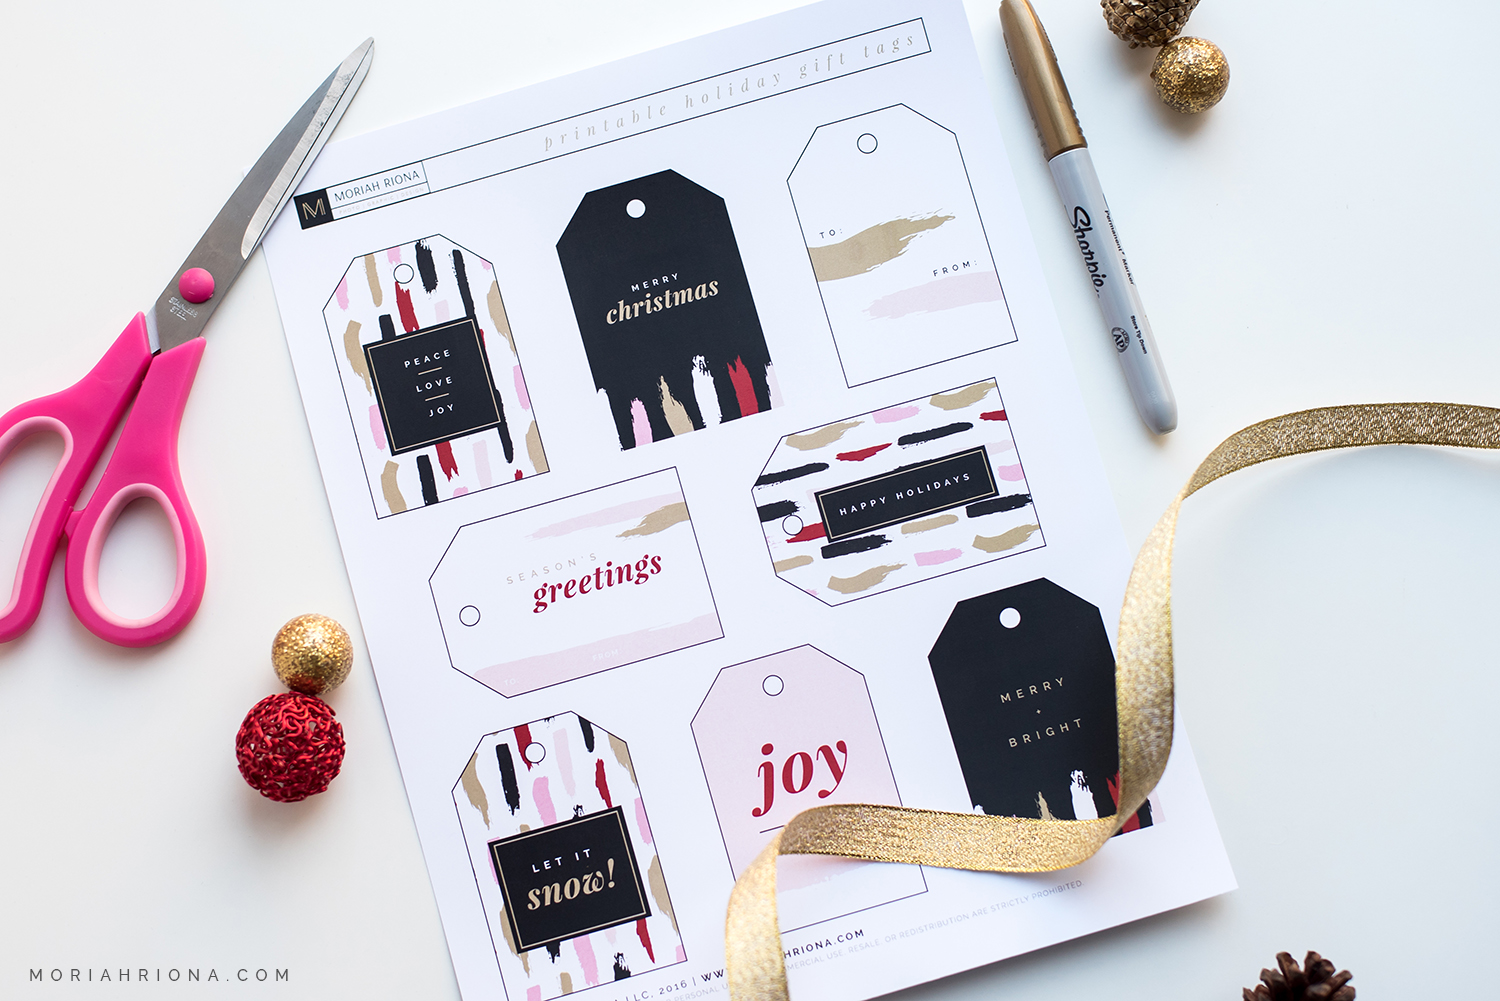 Downloadable printable holiday gift tags by Moriah Riona. Branding and Graphic Design for photographers and creative bossladies.